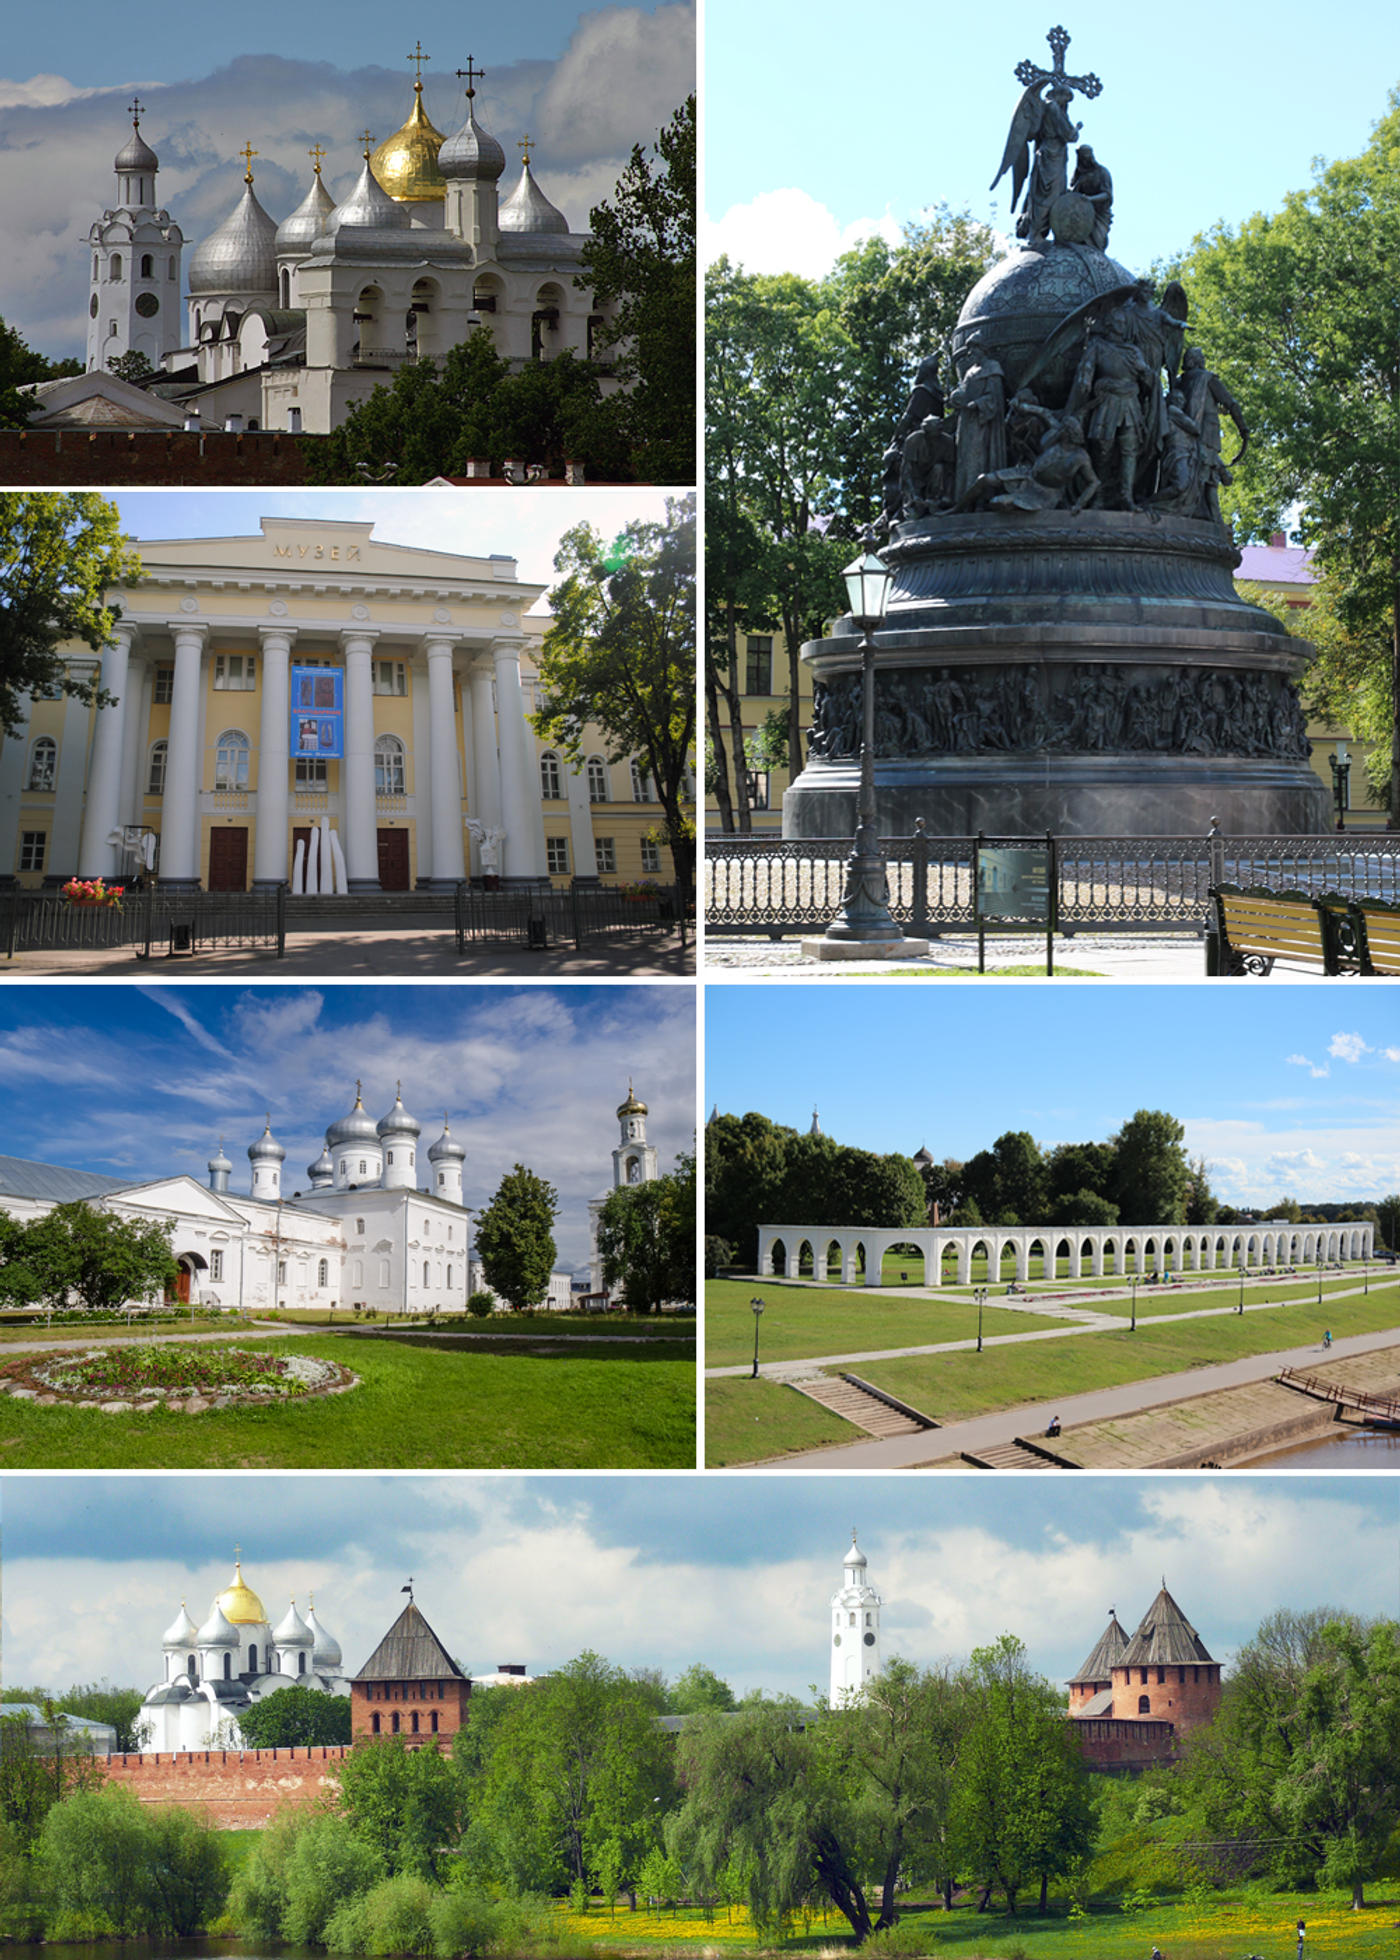 Veliky Novgorod: Time travel to the Middle Ages